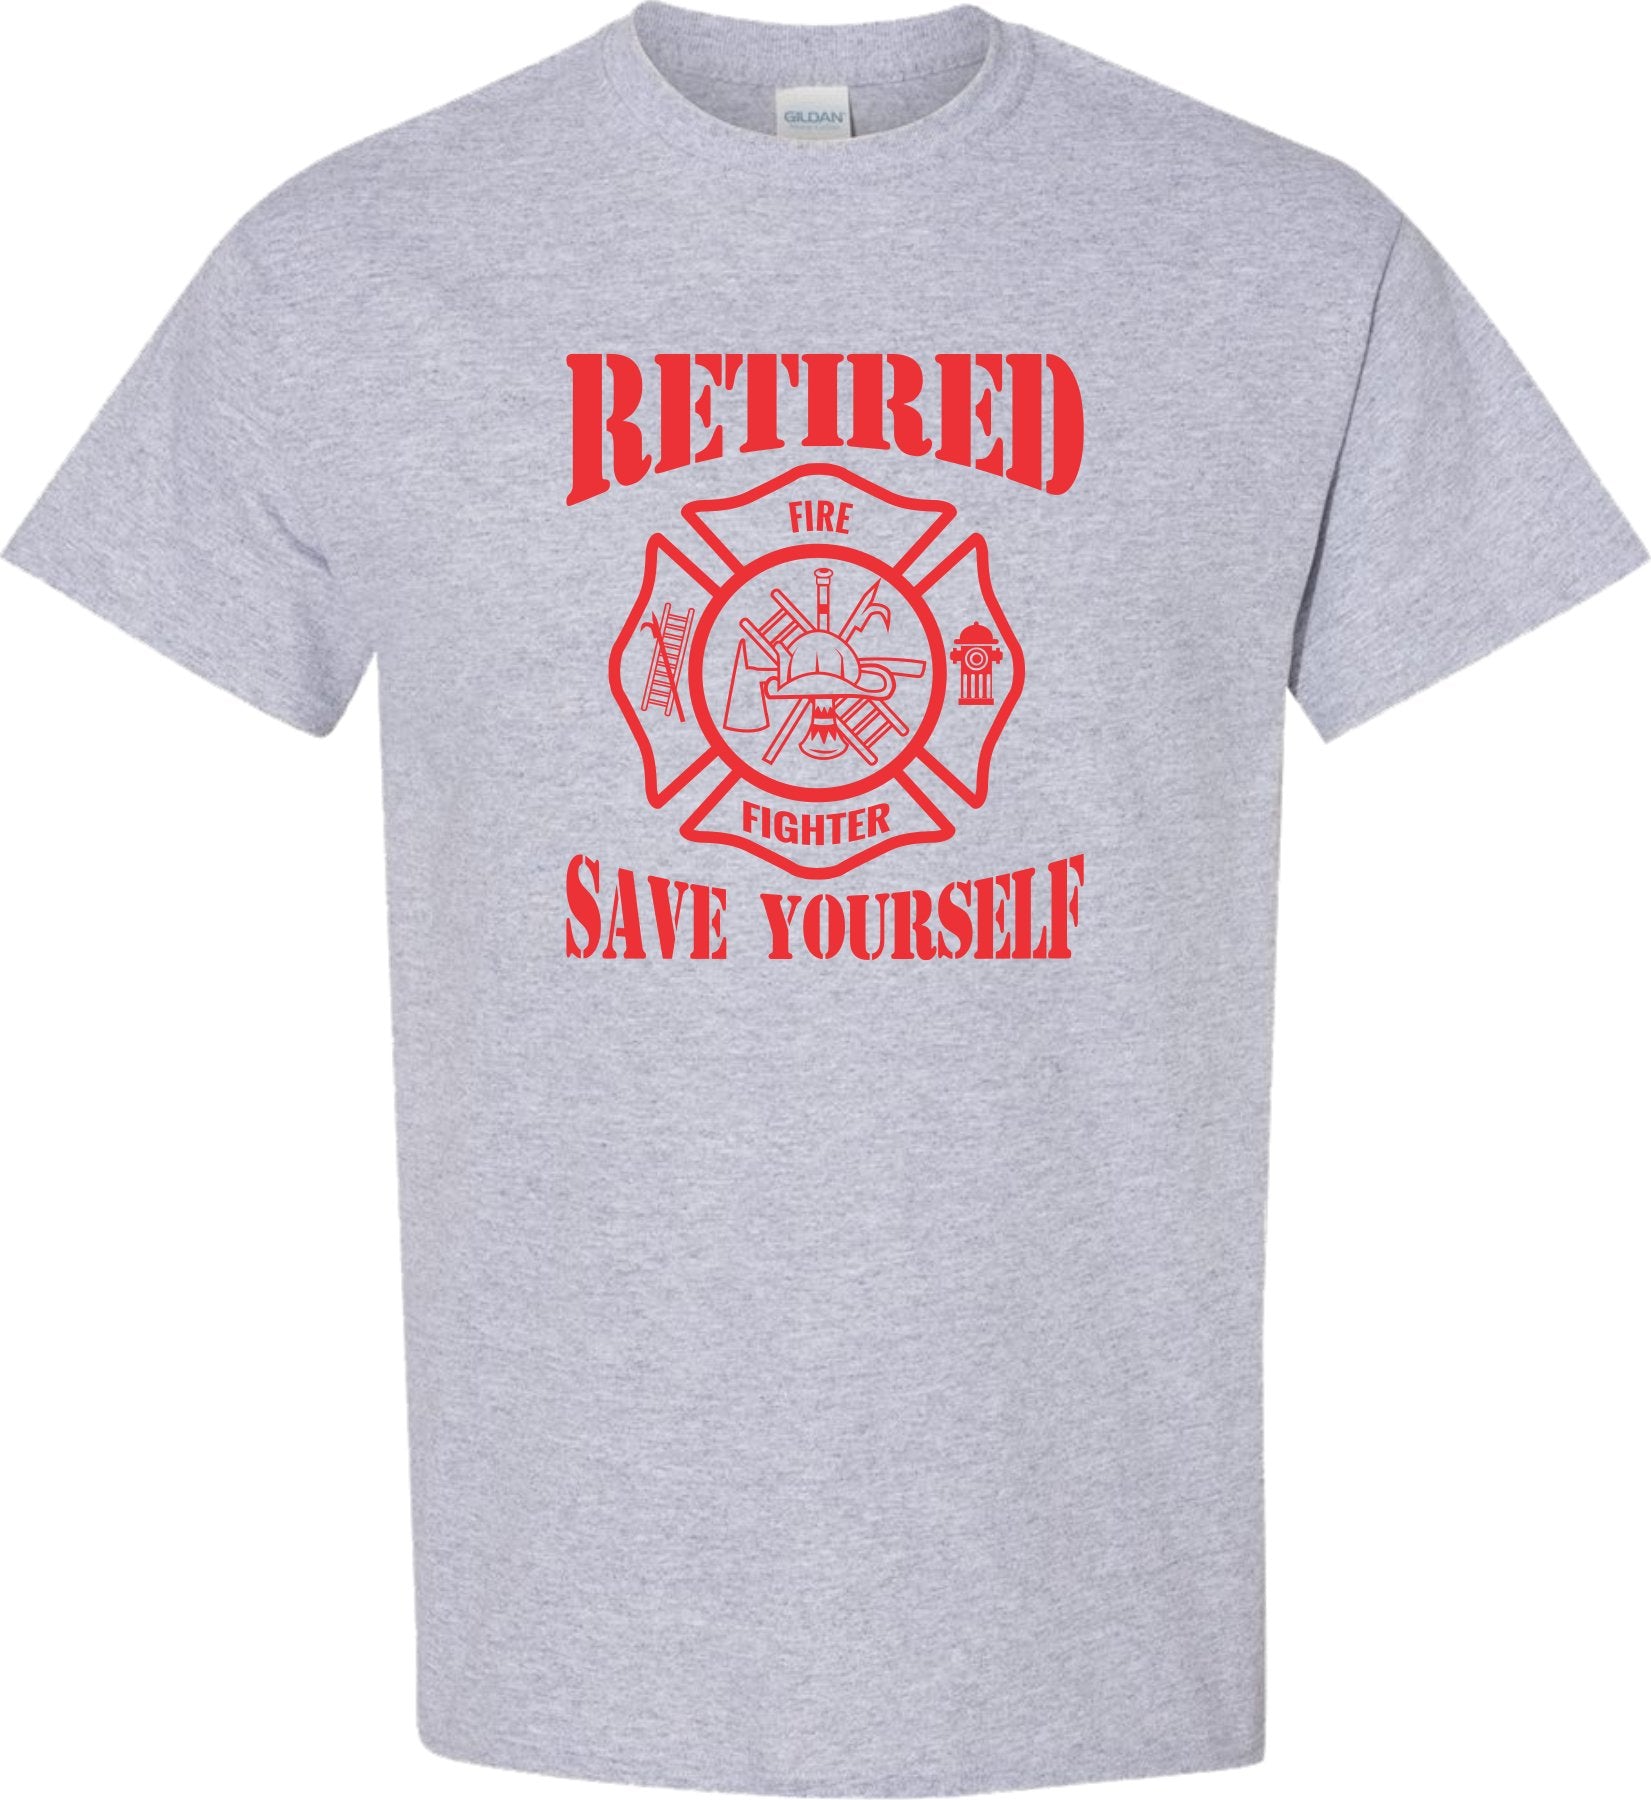 Retired Firefighter, Save Yourself T Shirt - SBS T Shop